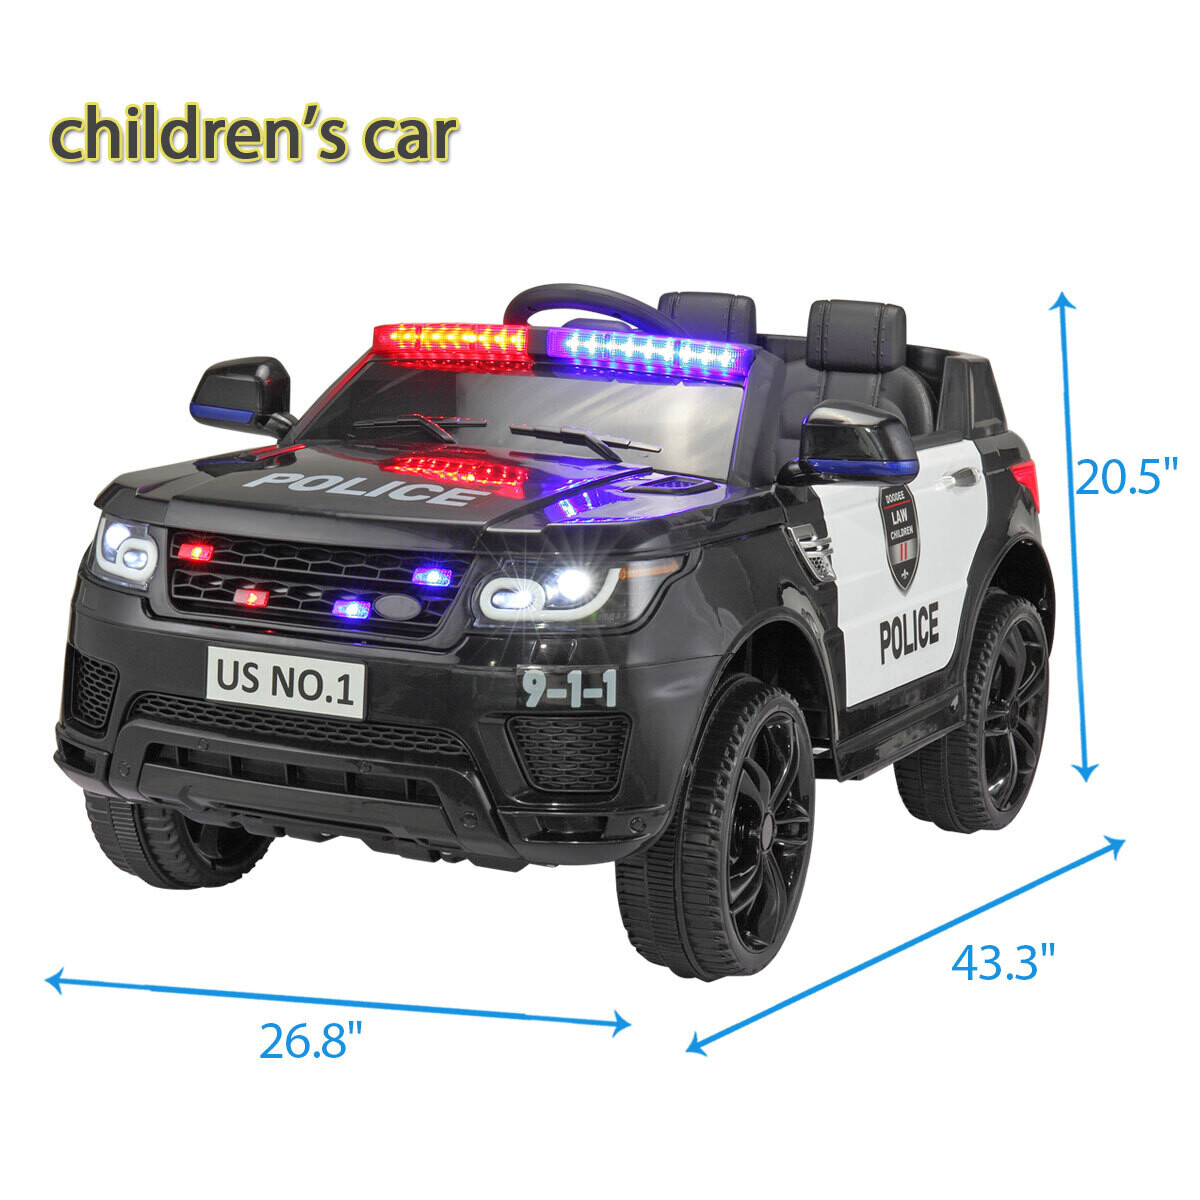 12V Kid Ride on Police Car with Parental Remote Control, Battery Powered Electric Truck with Siren, Flashing Lights,Music, Spring Suspension, Black, Options: Black+Polypropylene